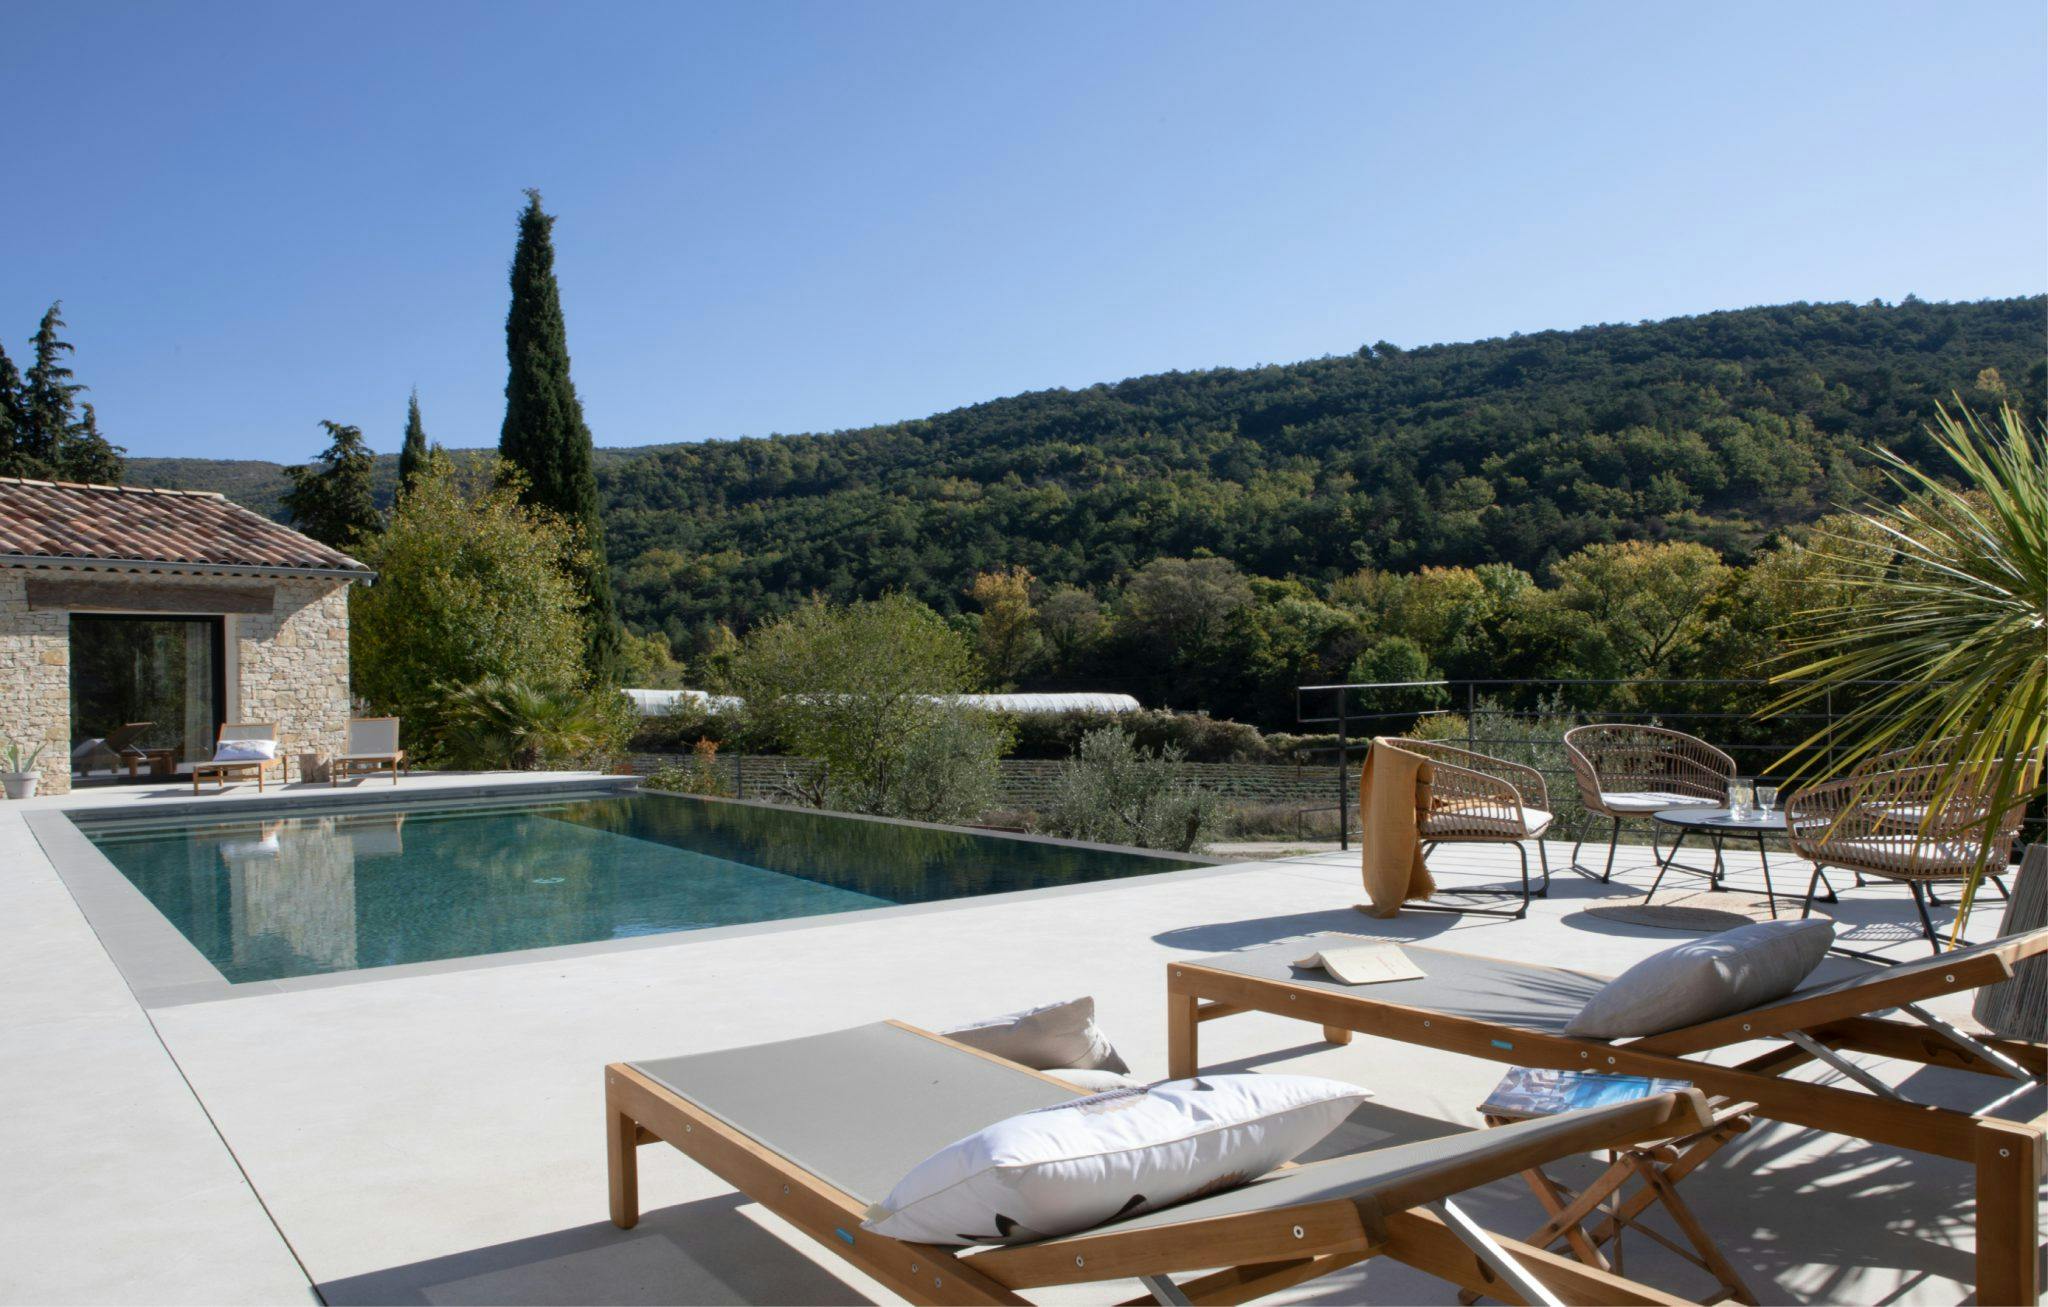 deckchair overlooking the countryside, by the pool